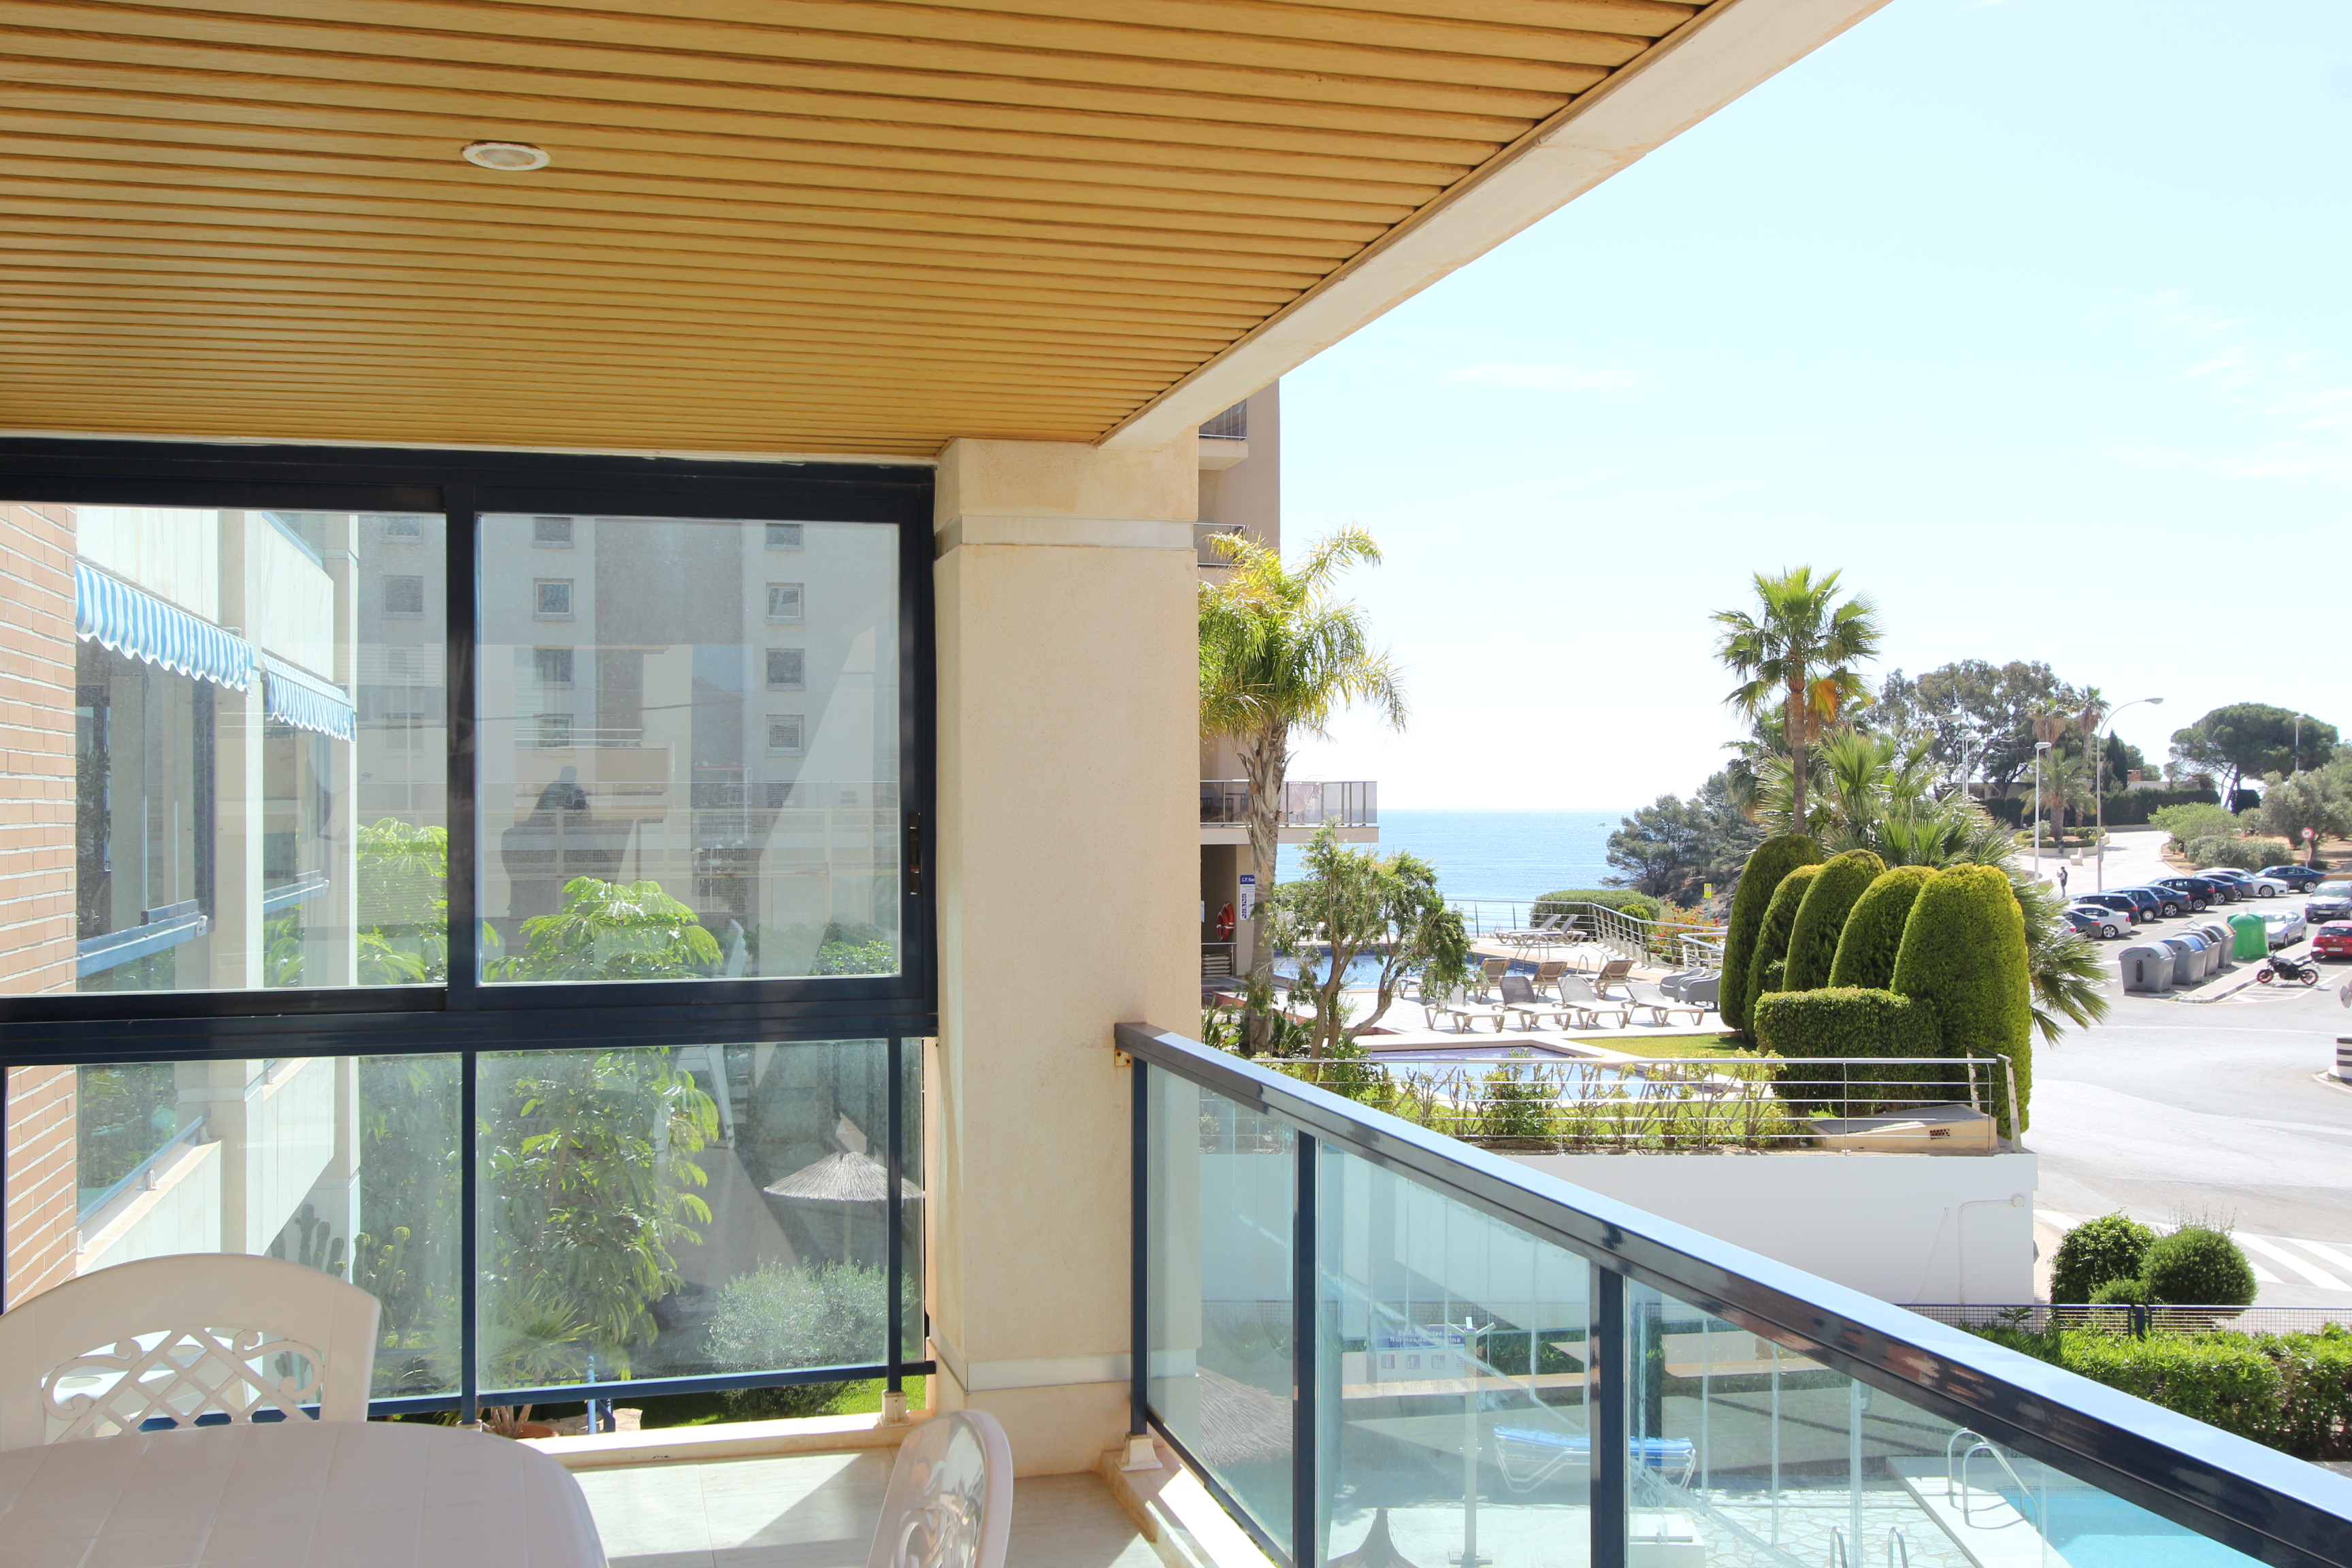 2 BEDROOM APARTMENT WITH SEA VIEWS, NEXT TO THE BEACH IN CALPE